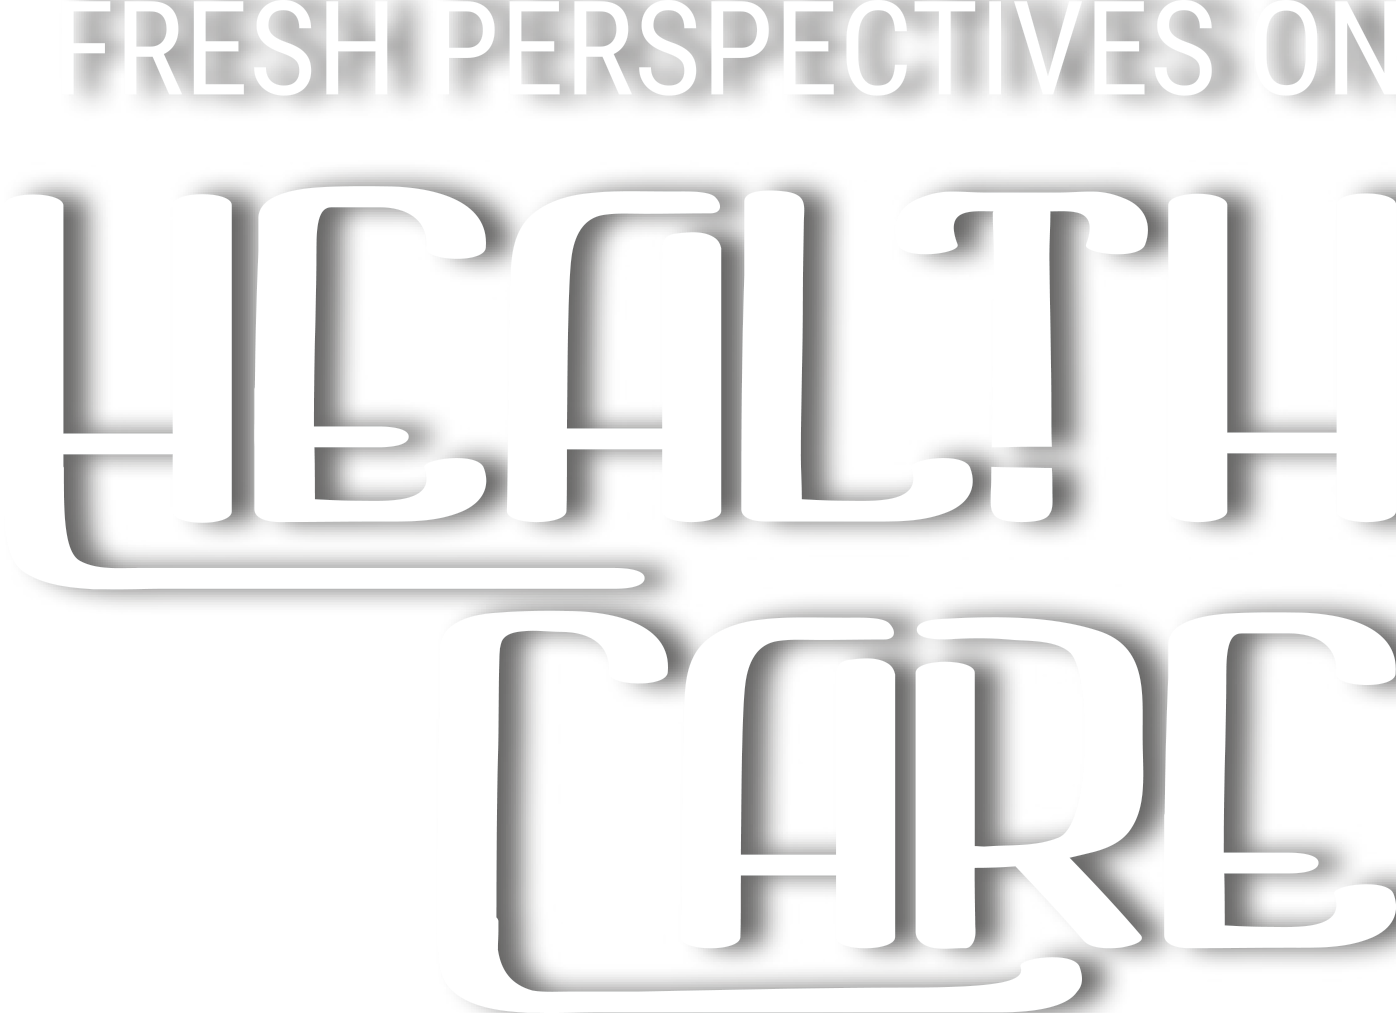 Fresh Perspectives on Health Care text